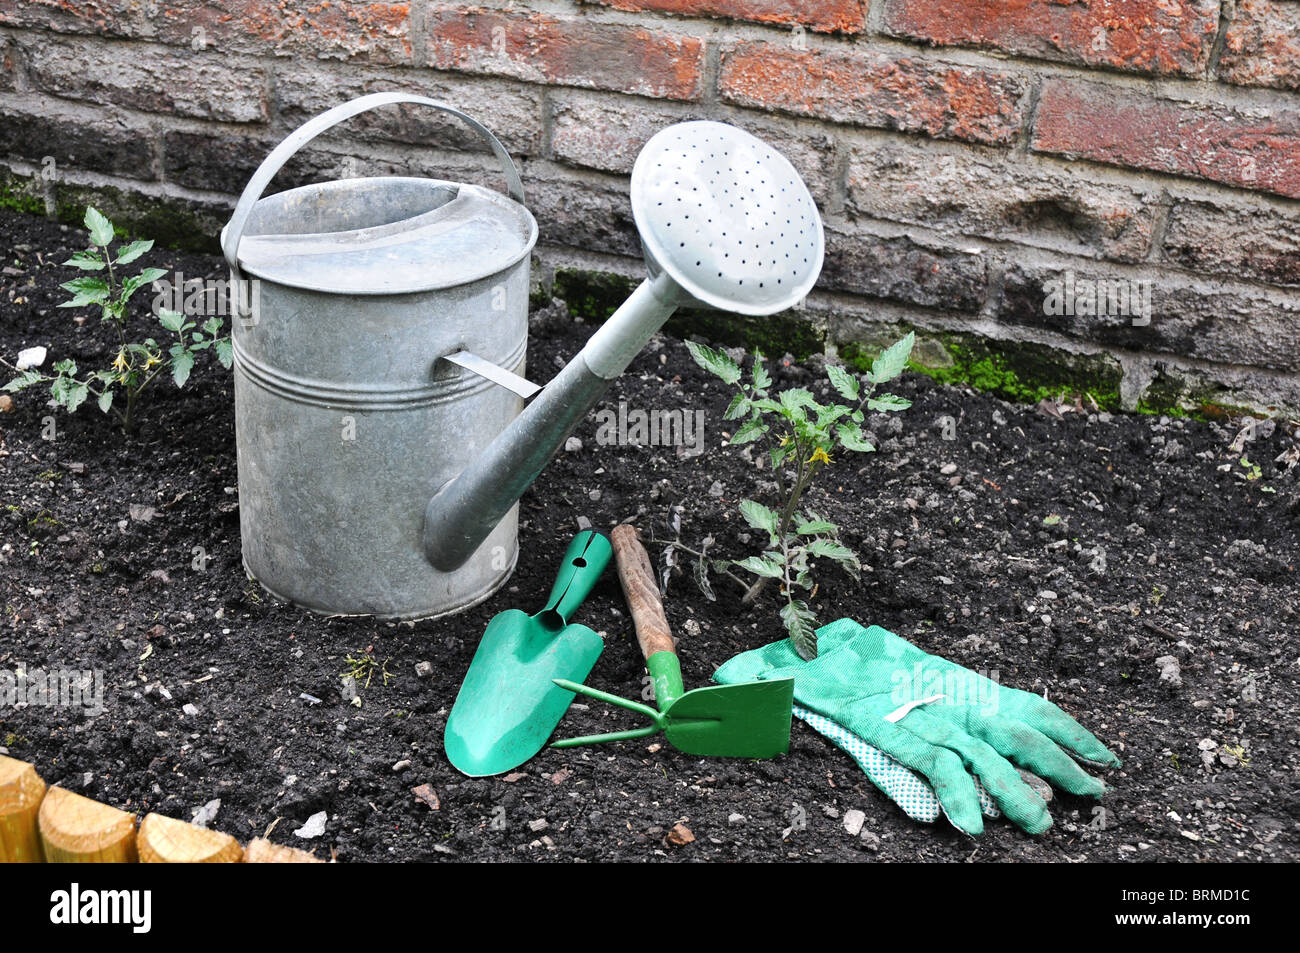 Old watering can on a vegetable patch with gardening tools. Stock Photo